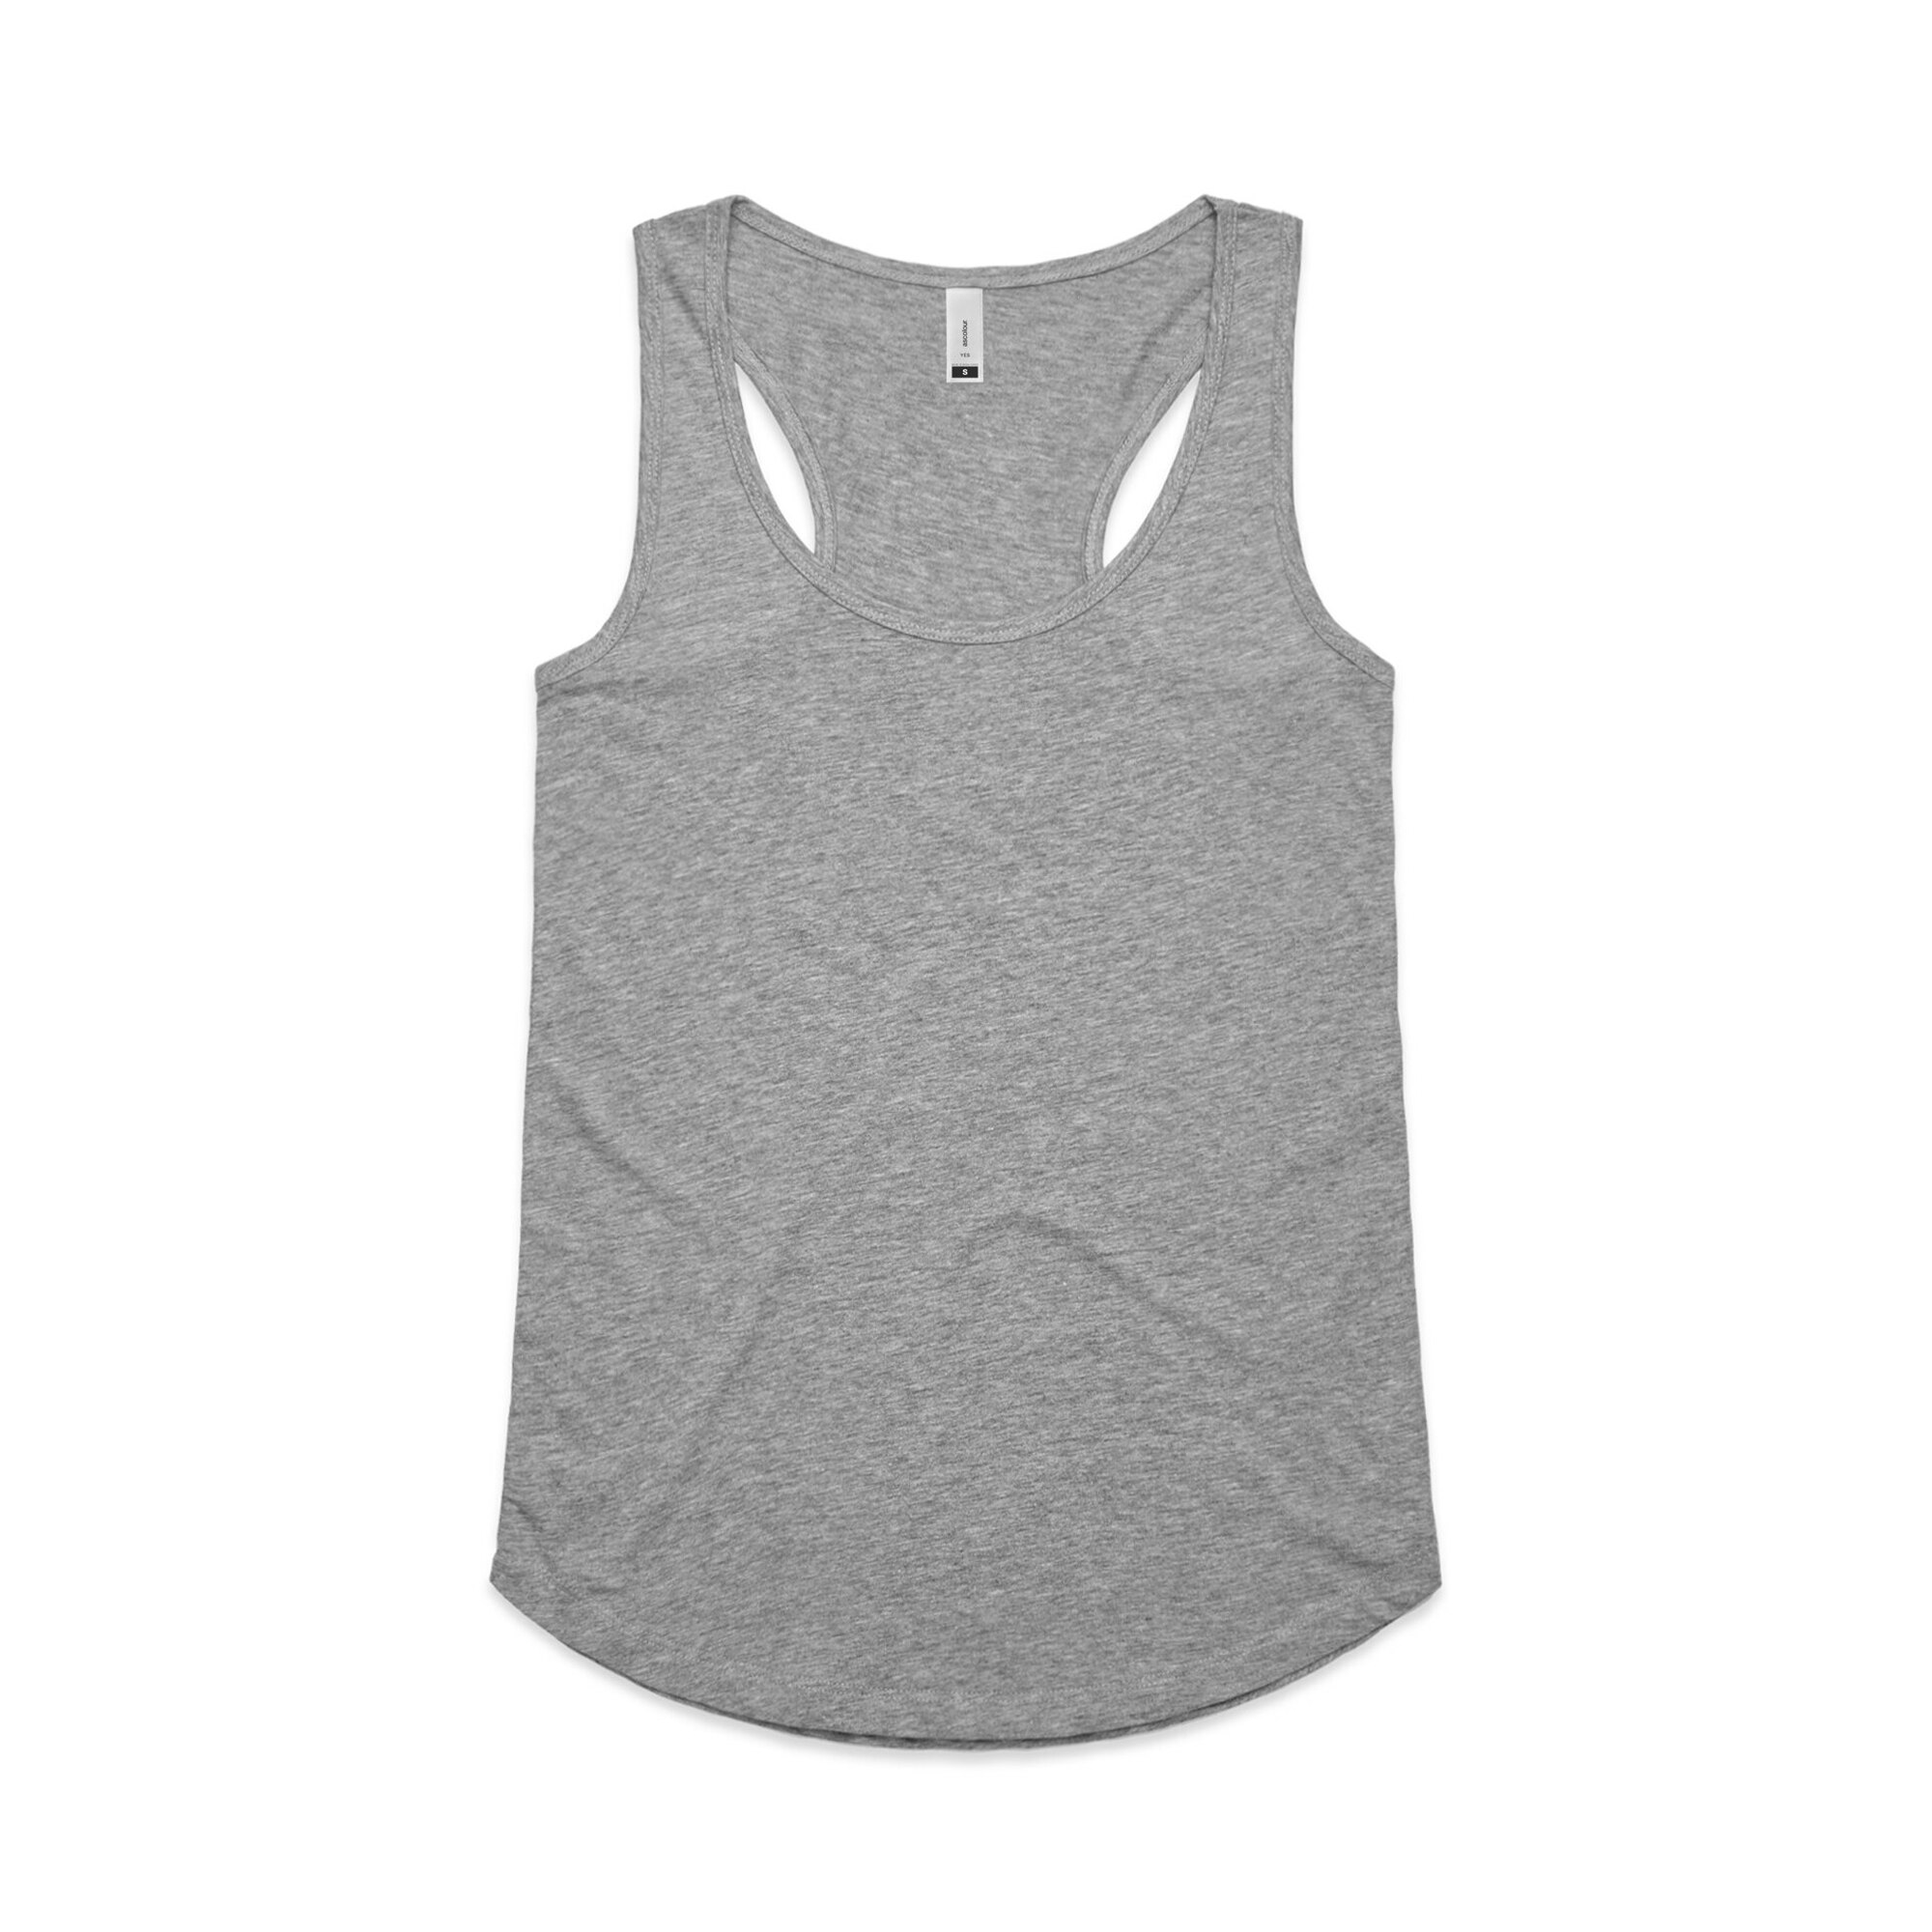 Buy Singlet and Tanks for garment decorating online at Machines Plus